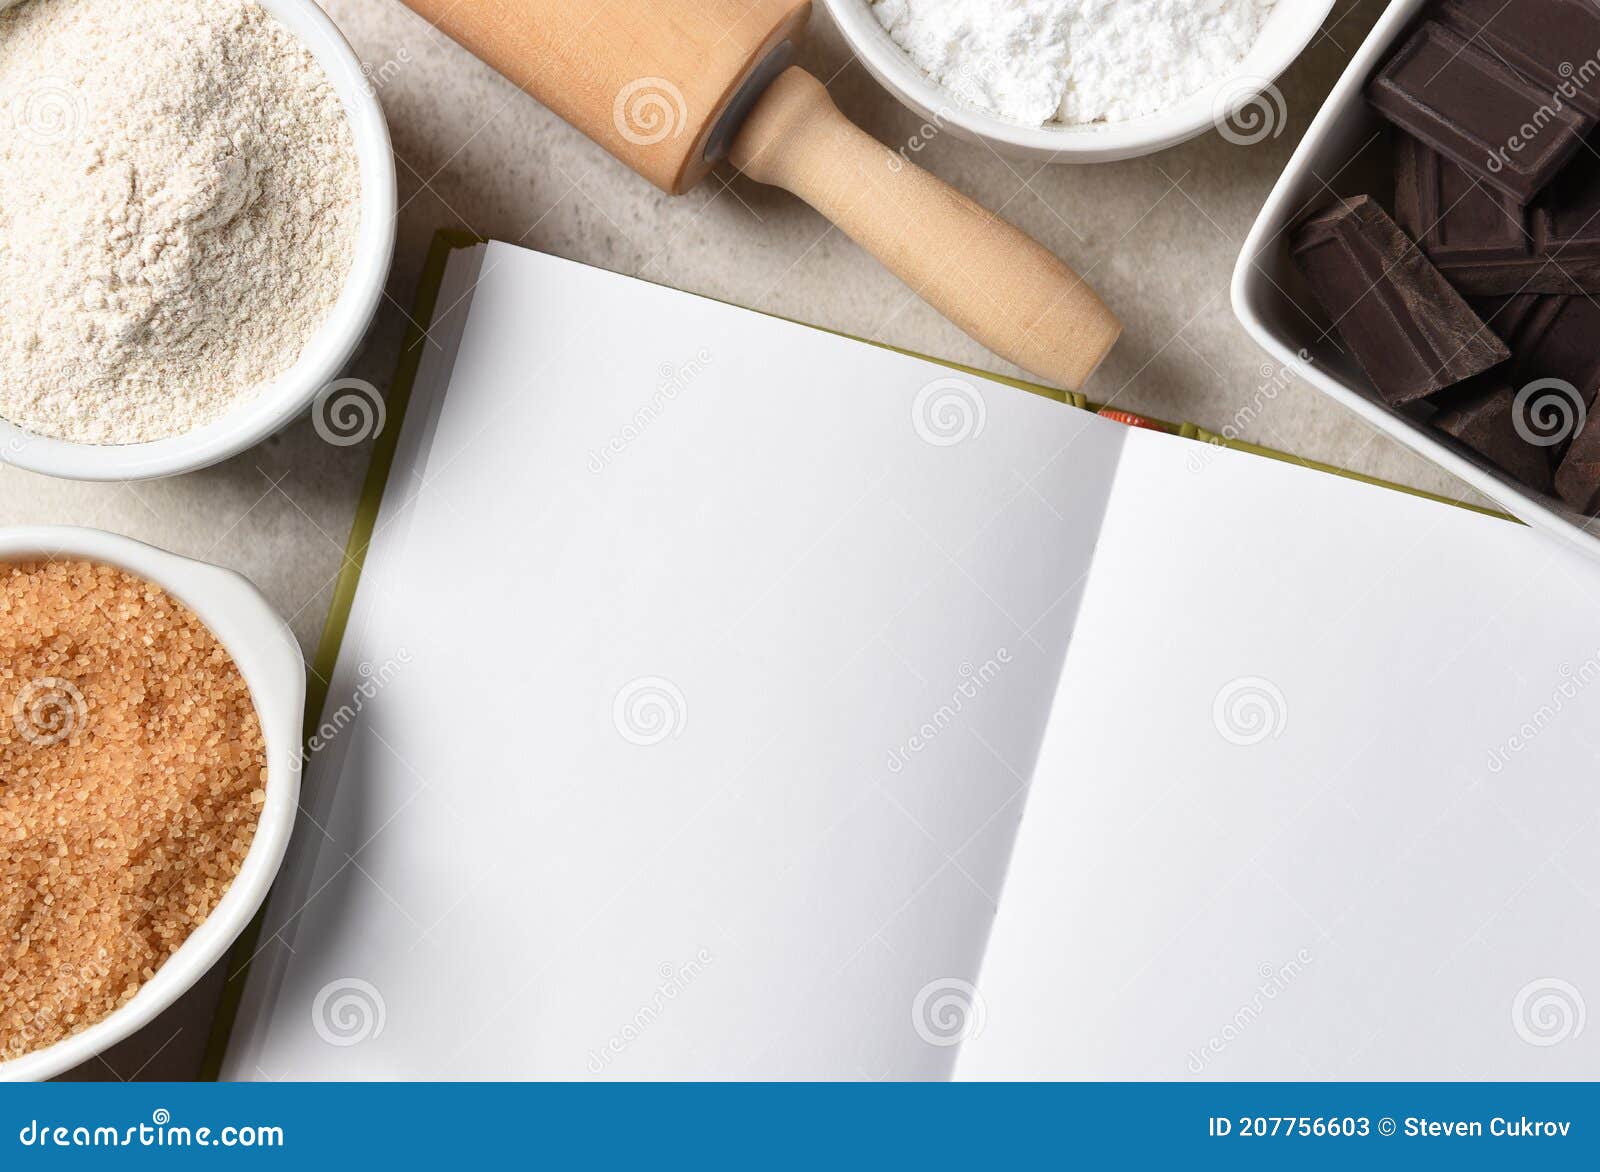 Baking Still Life. Blank Pages of an Open Recipe Book Surrounded by a ...